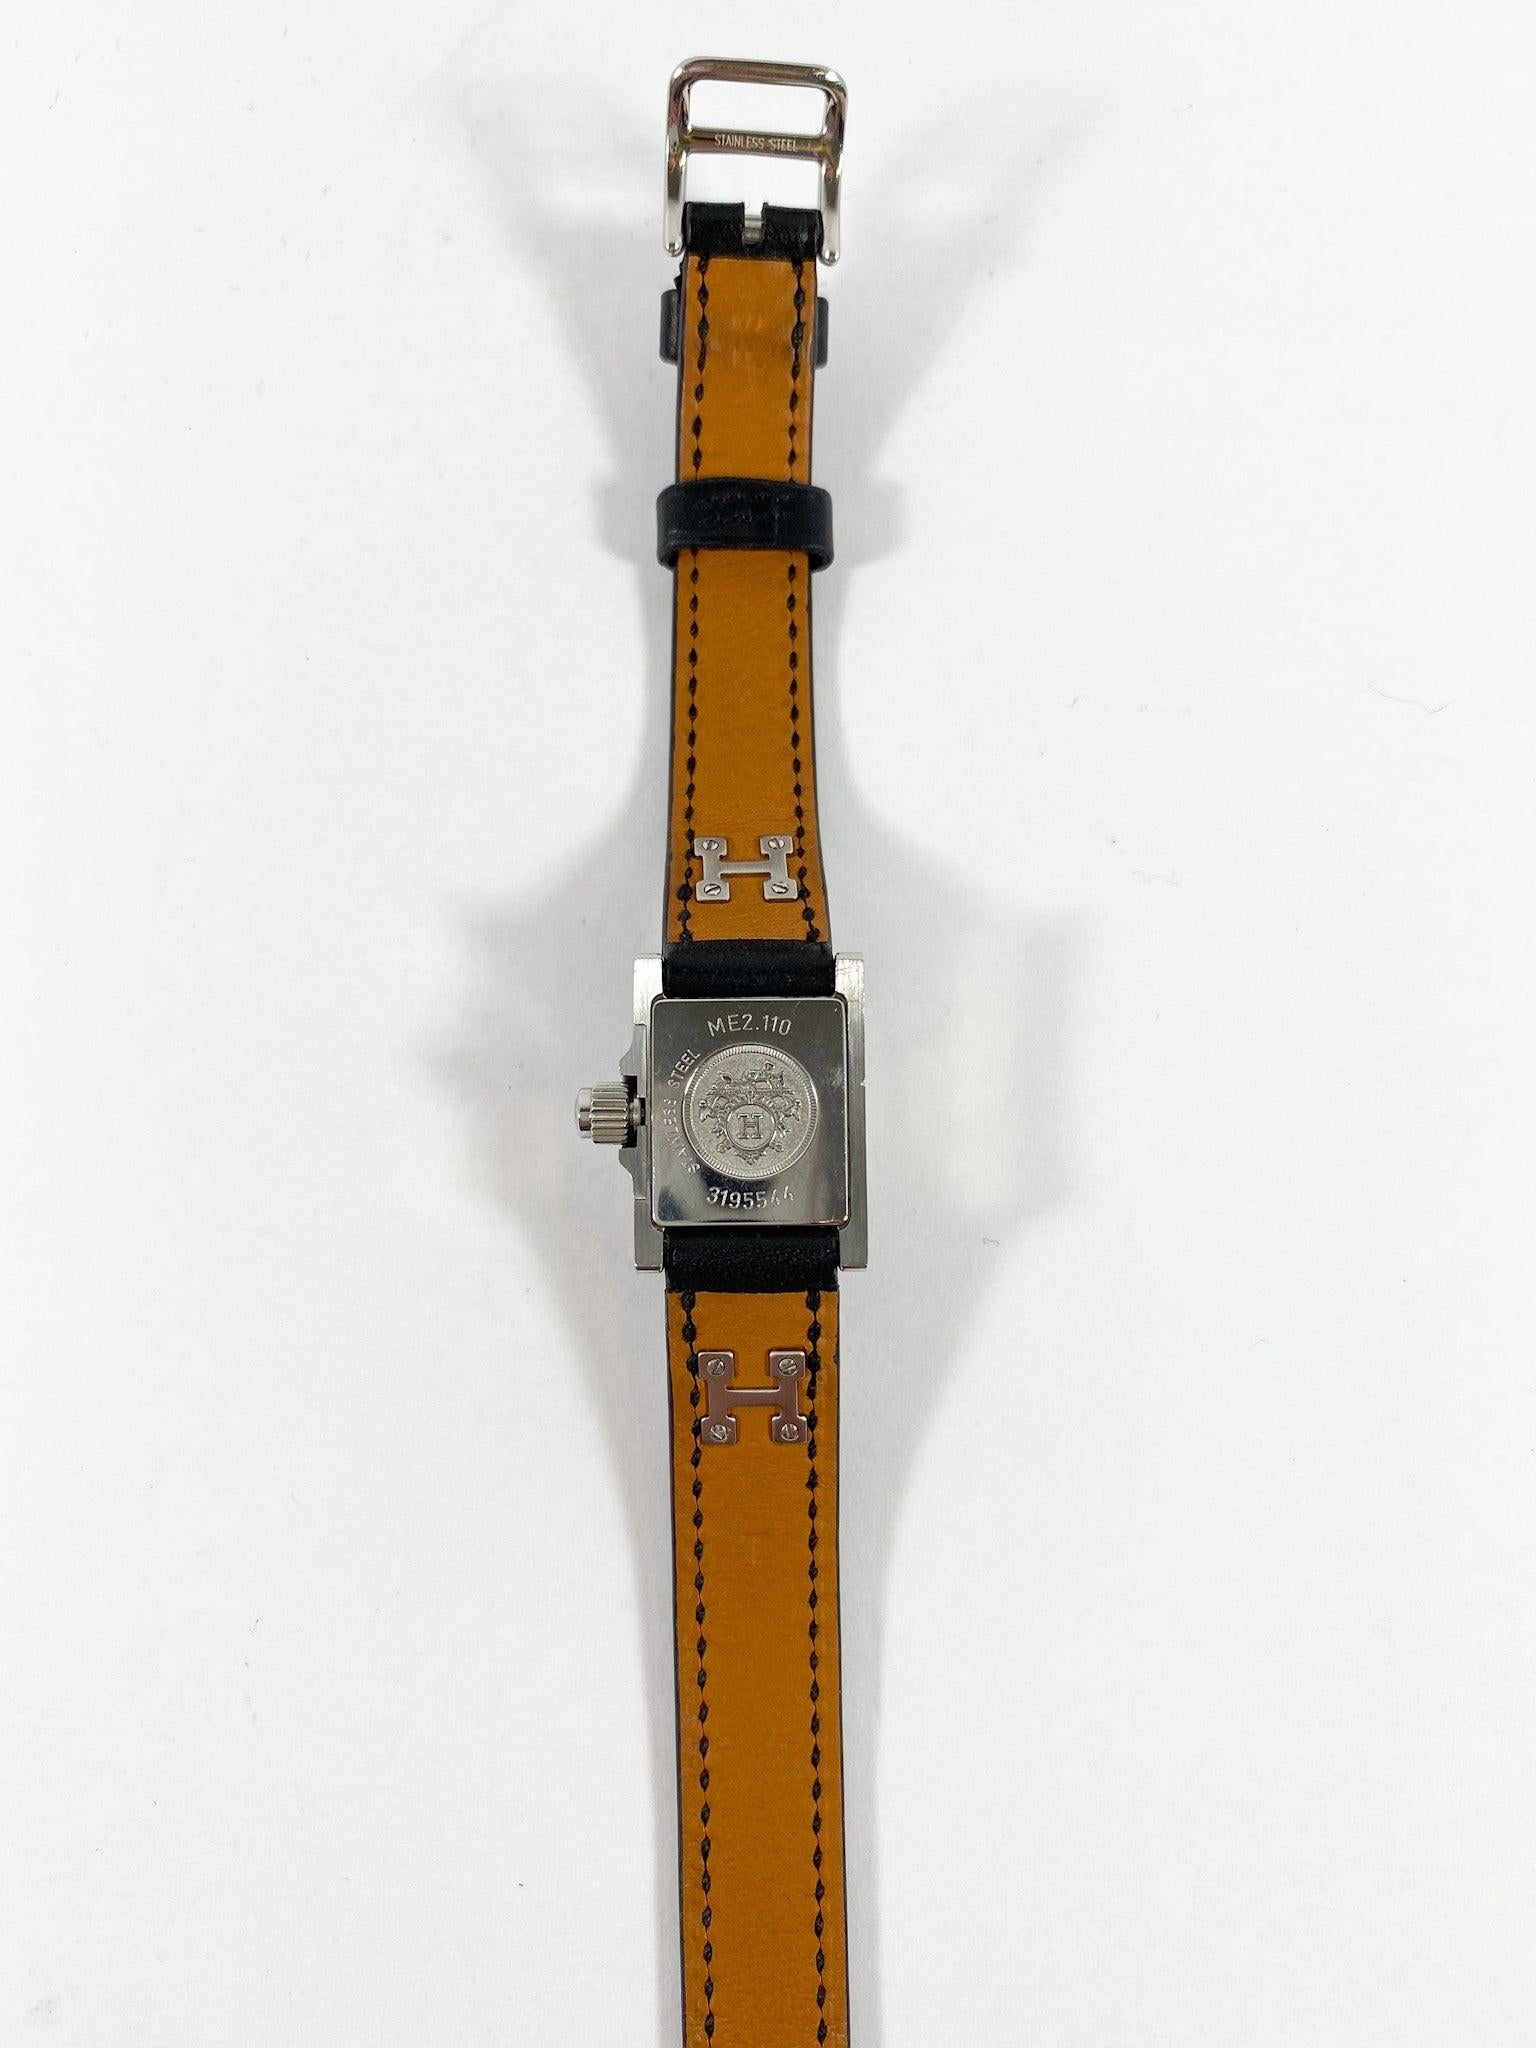 Hermès Black Medor Watch with Extra Band

This is an authentic Hermes Medor wrist watch. The watch comes with a black leather band and an alternate brown leather band that can be changed. This watch features the classic Hermes studs. The larger